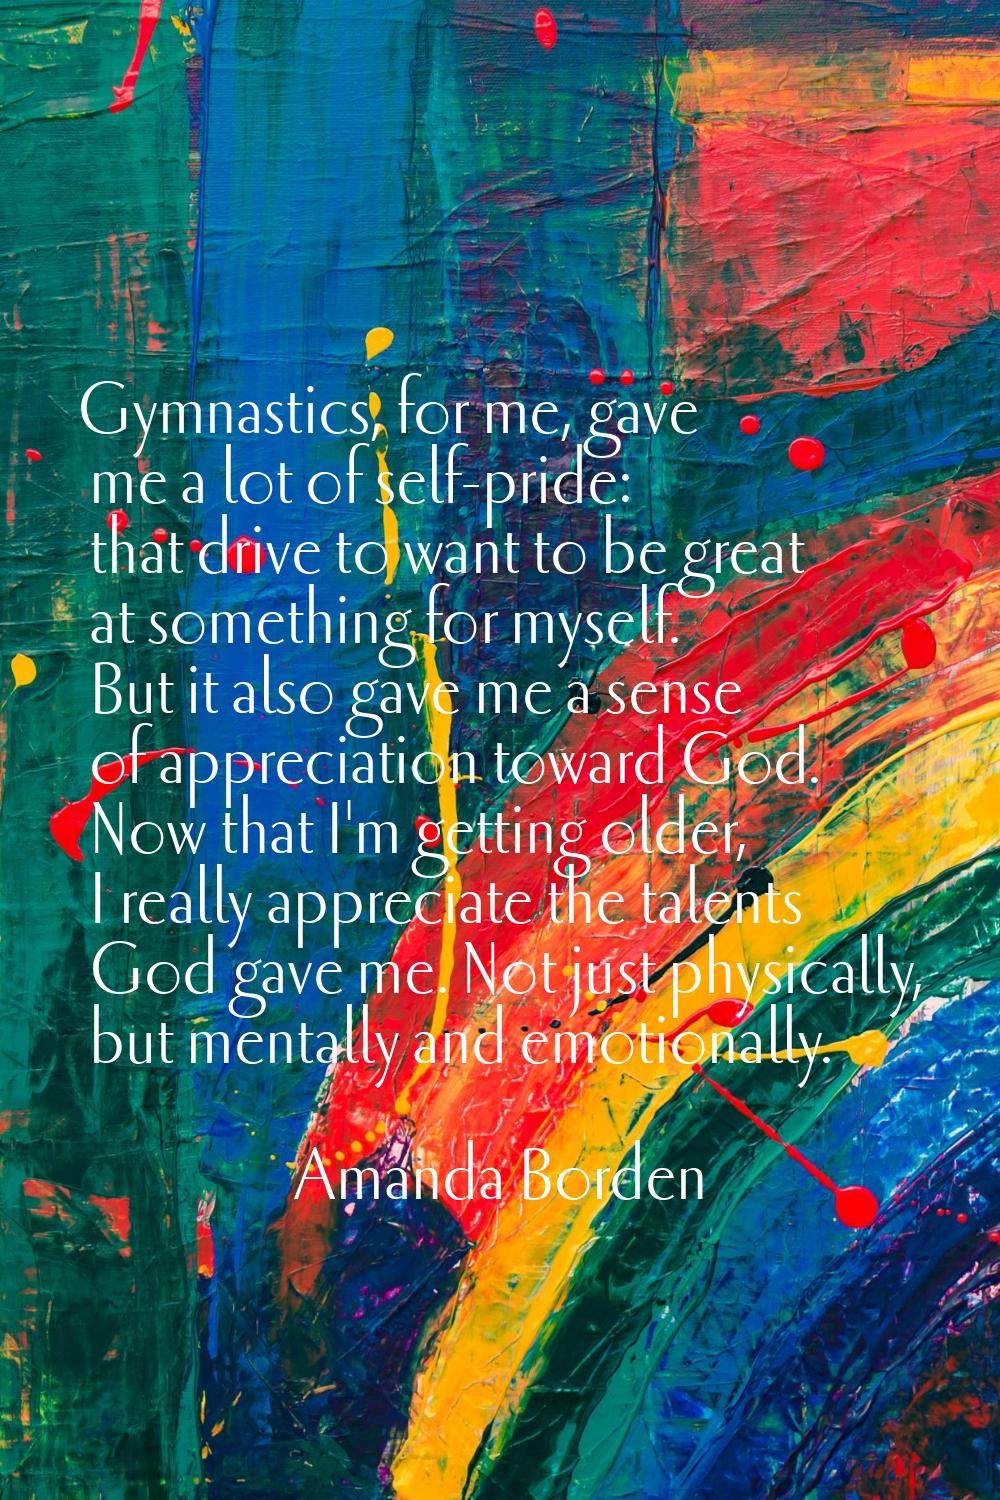 Gymnastics, for me, gave me a lot of self-pride: that drive to want to be great at something for my